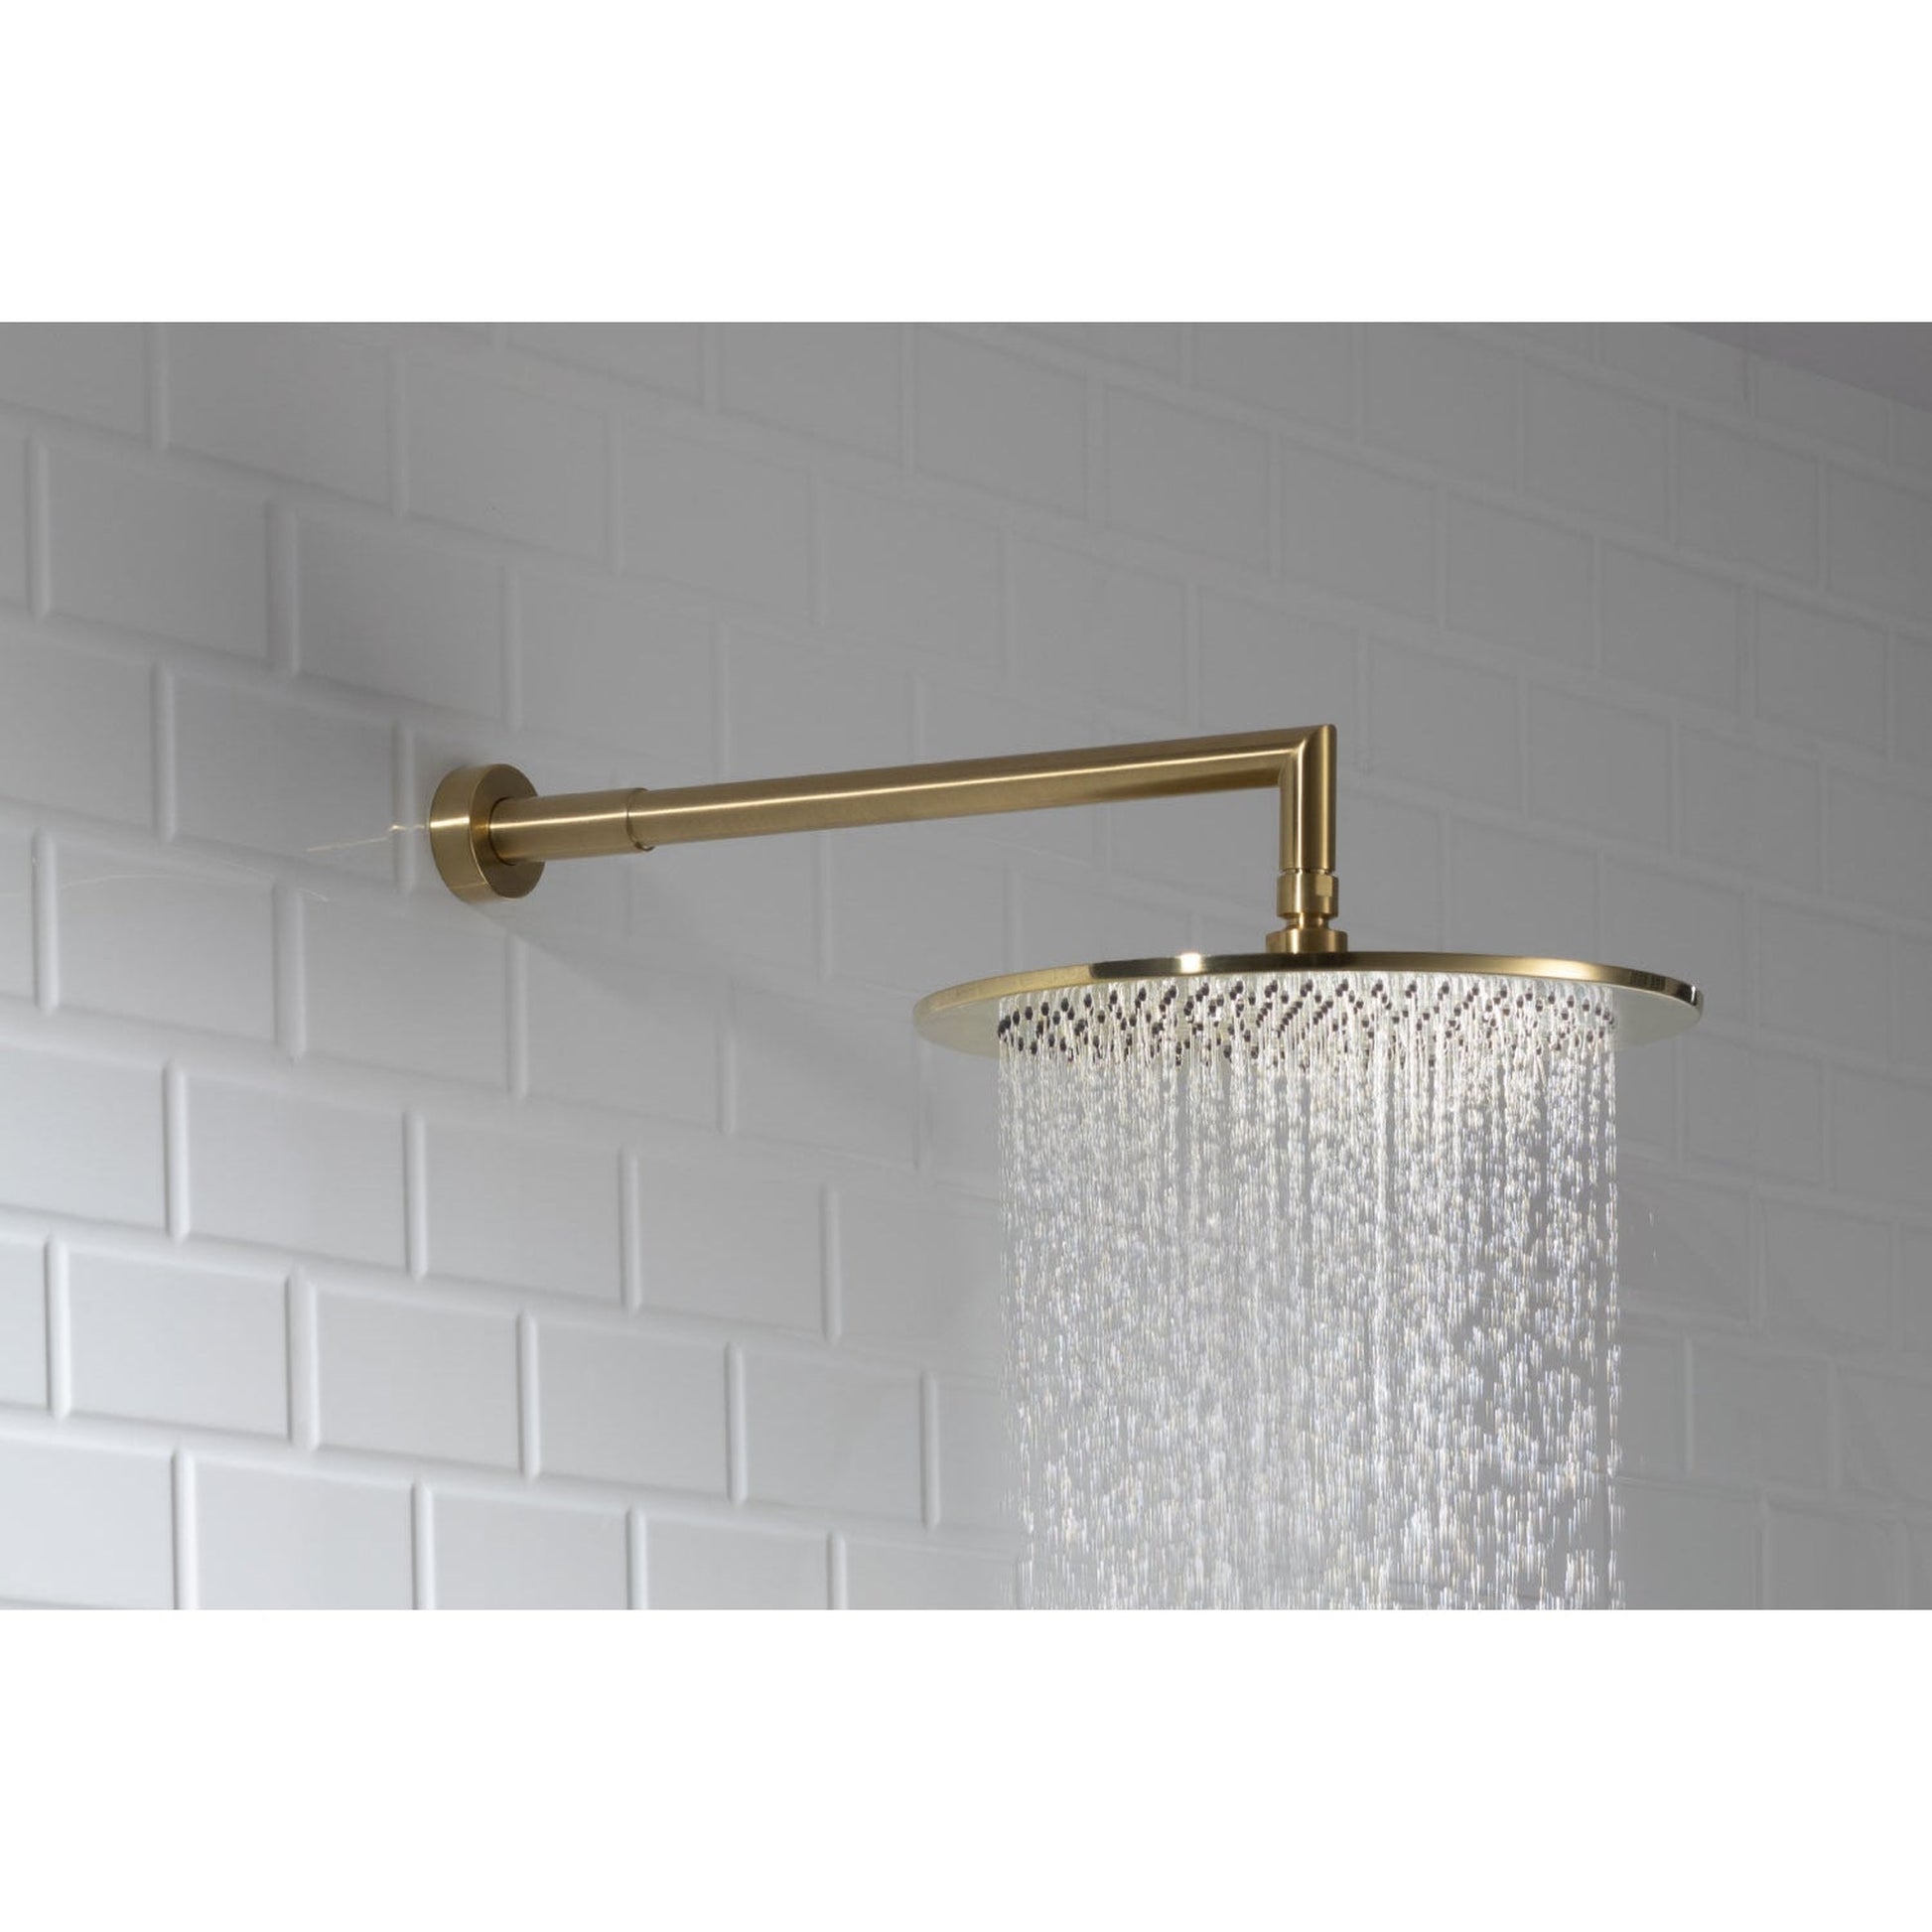 Isenberg Universal Fixtures 16" Satin Brass PVD Solid Brass Wall-Mounted Shower Arm With Angled Extension and Round Sliding Flange